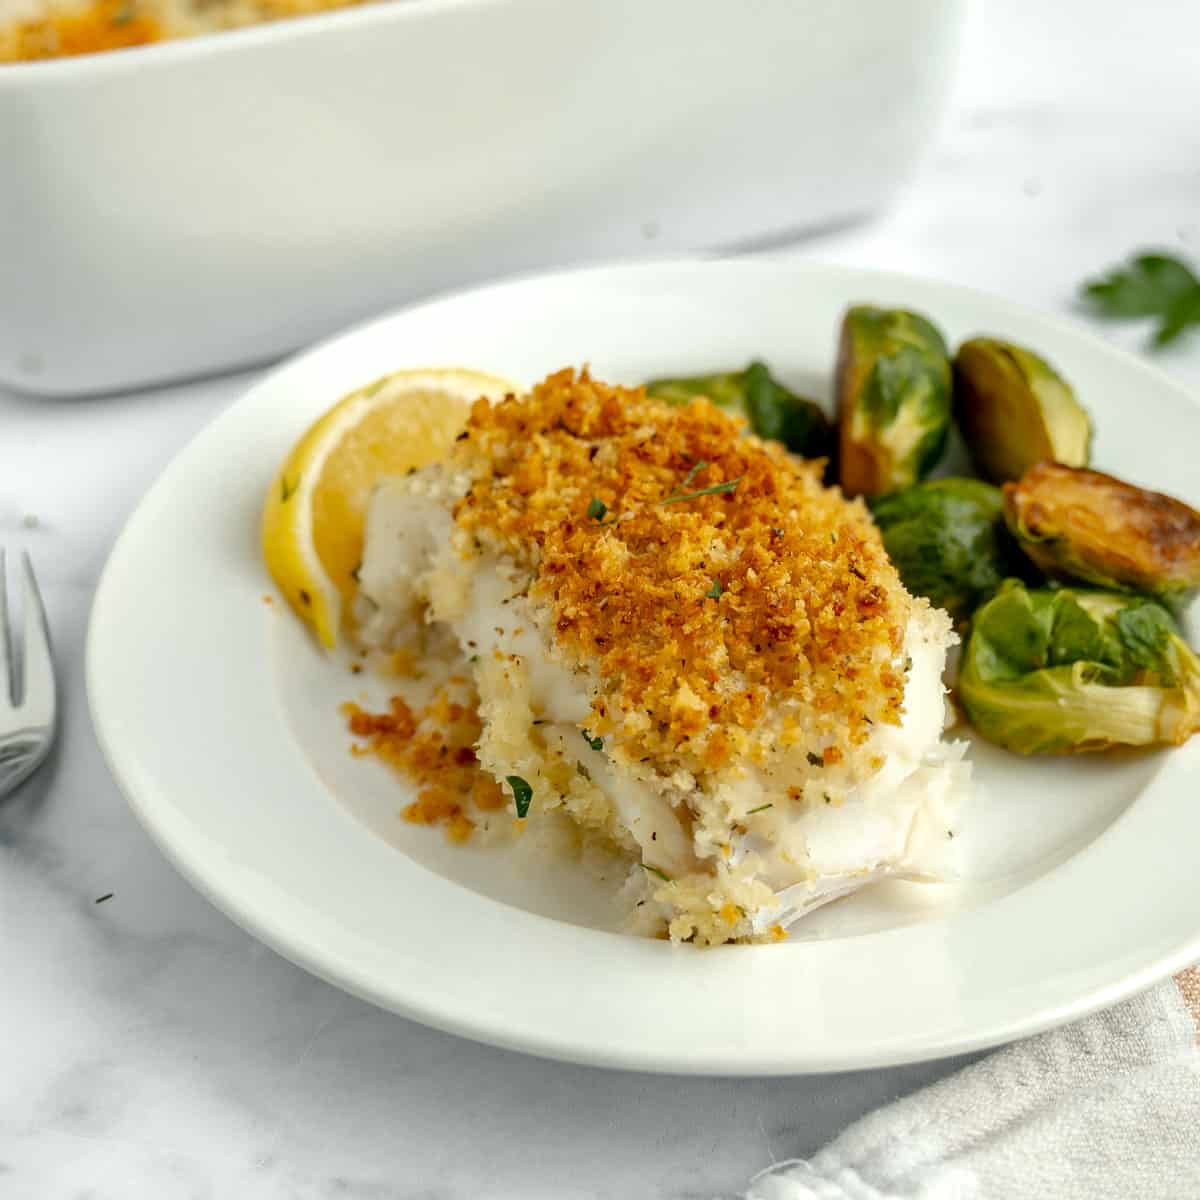 Baked fish on a plate with brussels sprouts.